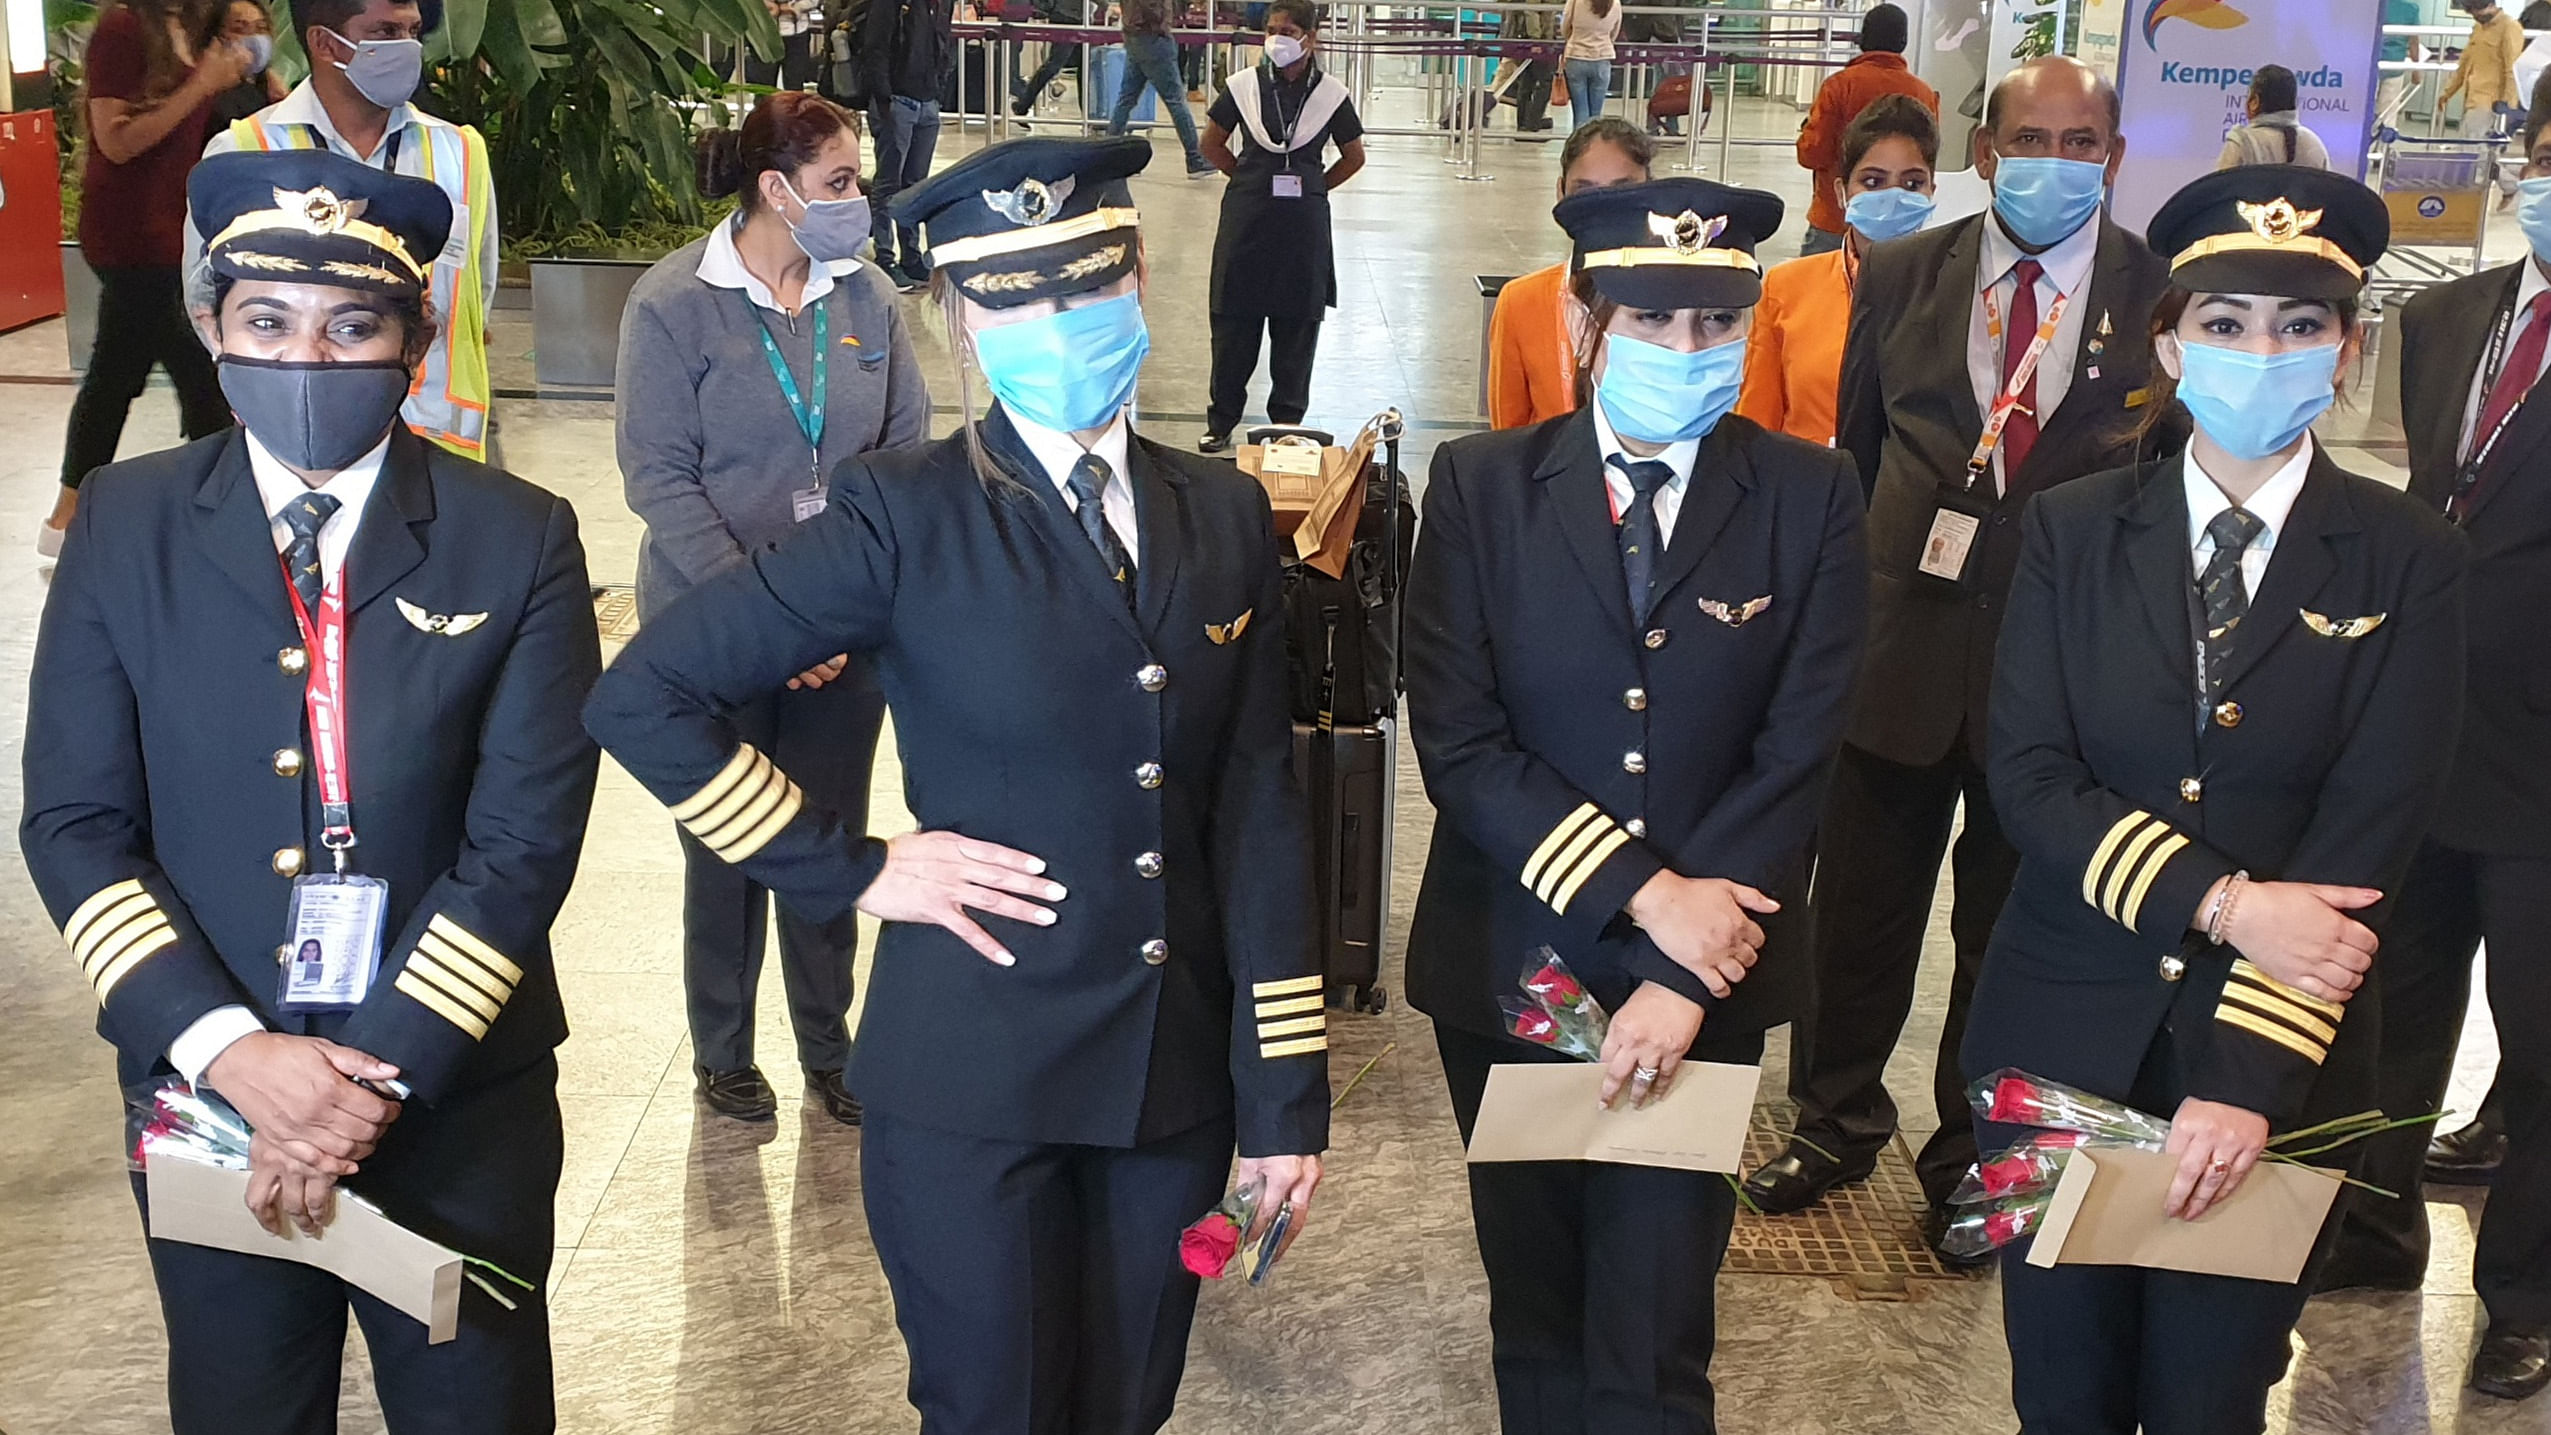 Commanded by Capt Zoya Aggarwal, the Boeing 777-200LR aircraft also had in the cockpit Capt Papagiri Thanmai, Capt Akansha Sonaware and Capt Shivani Manhas. Credit: DH Photo